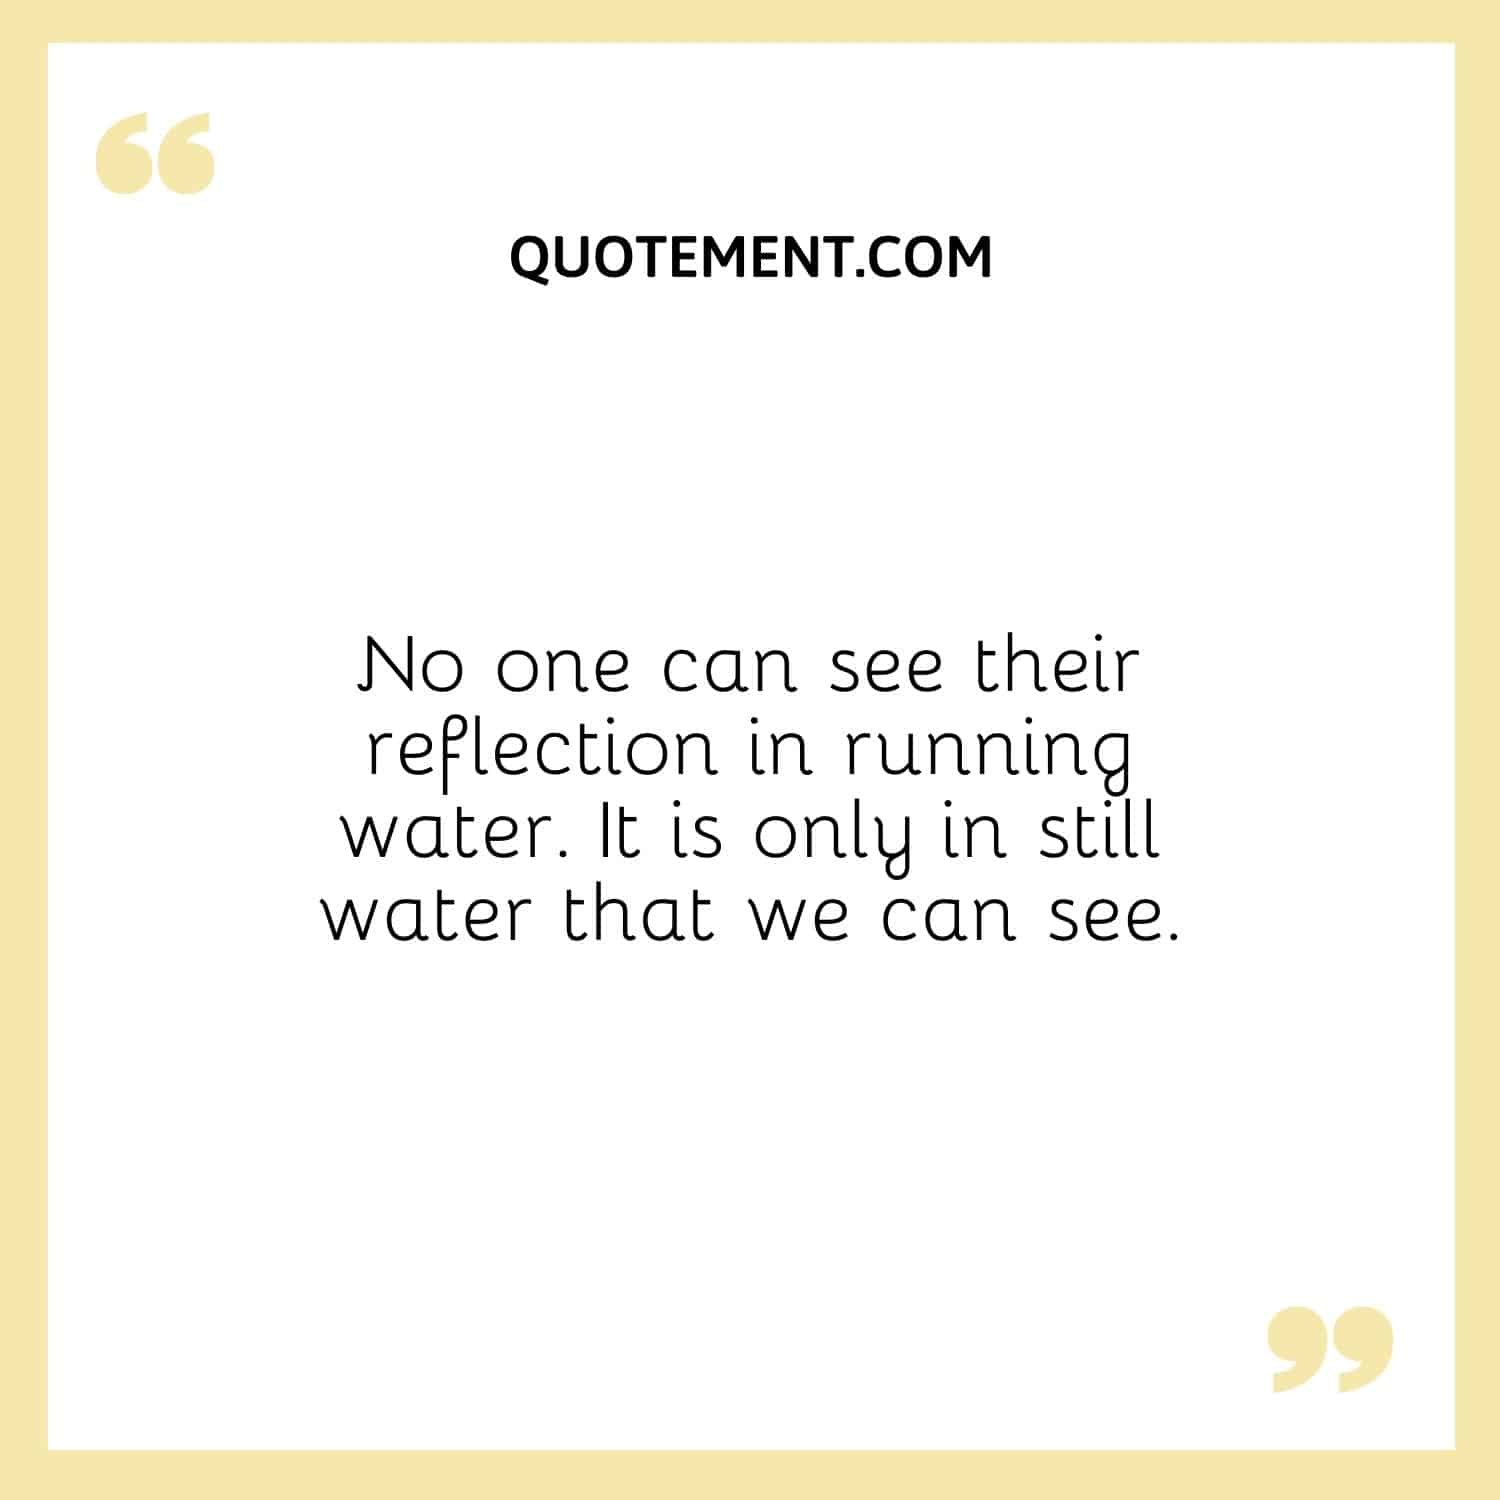 No one can see their reflection in running water.